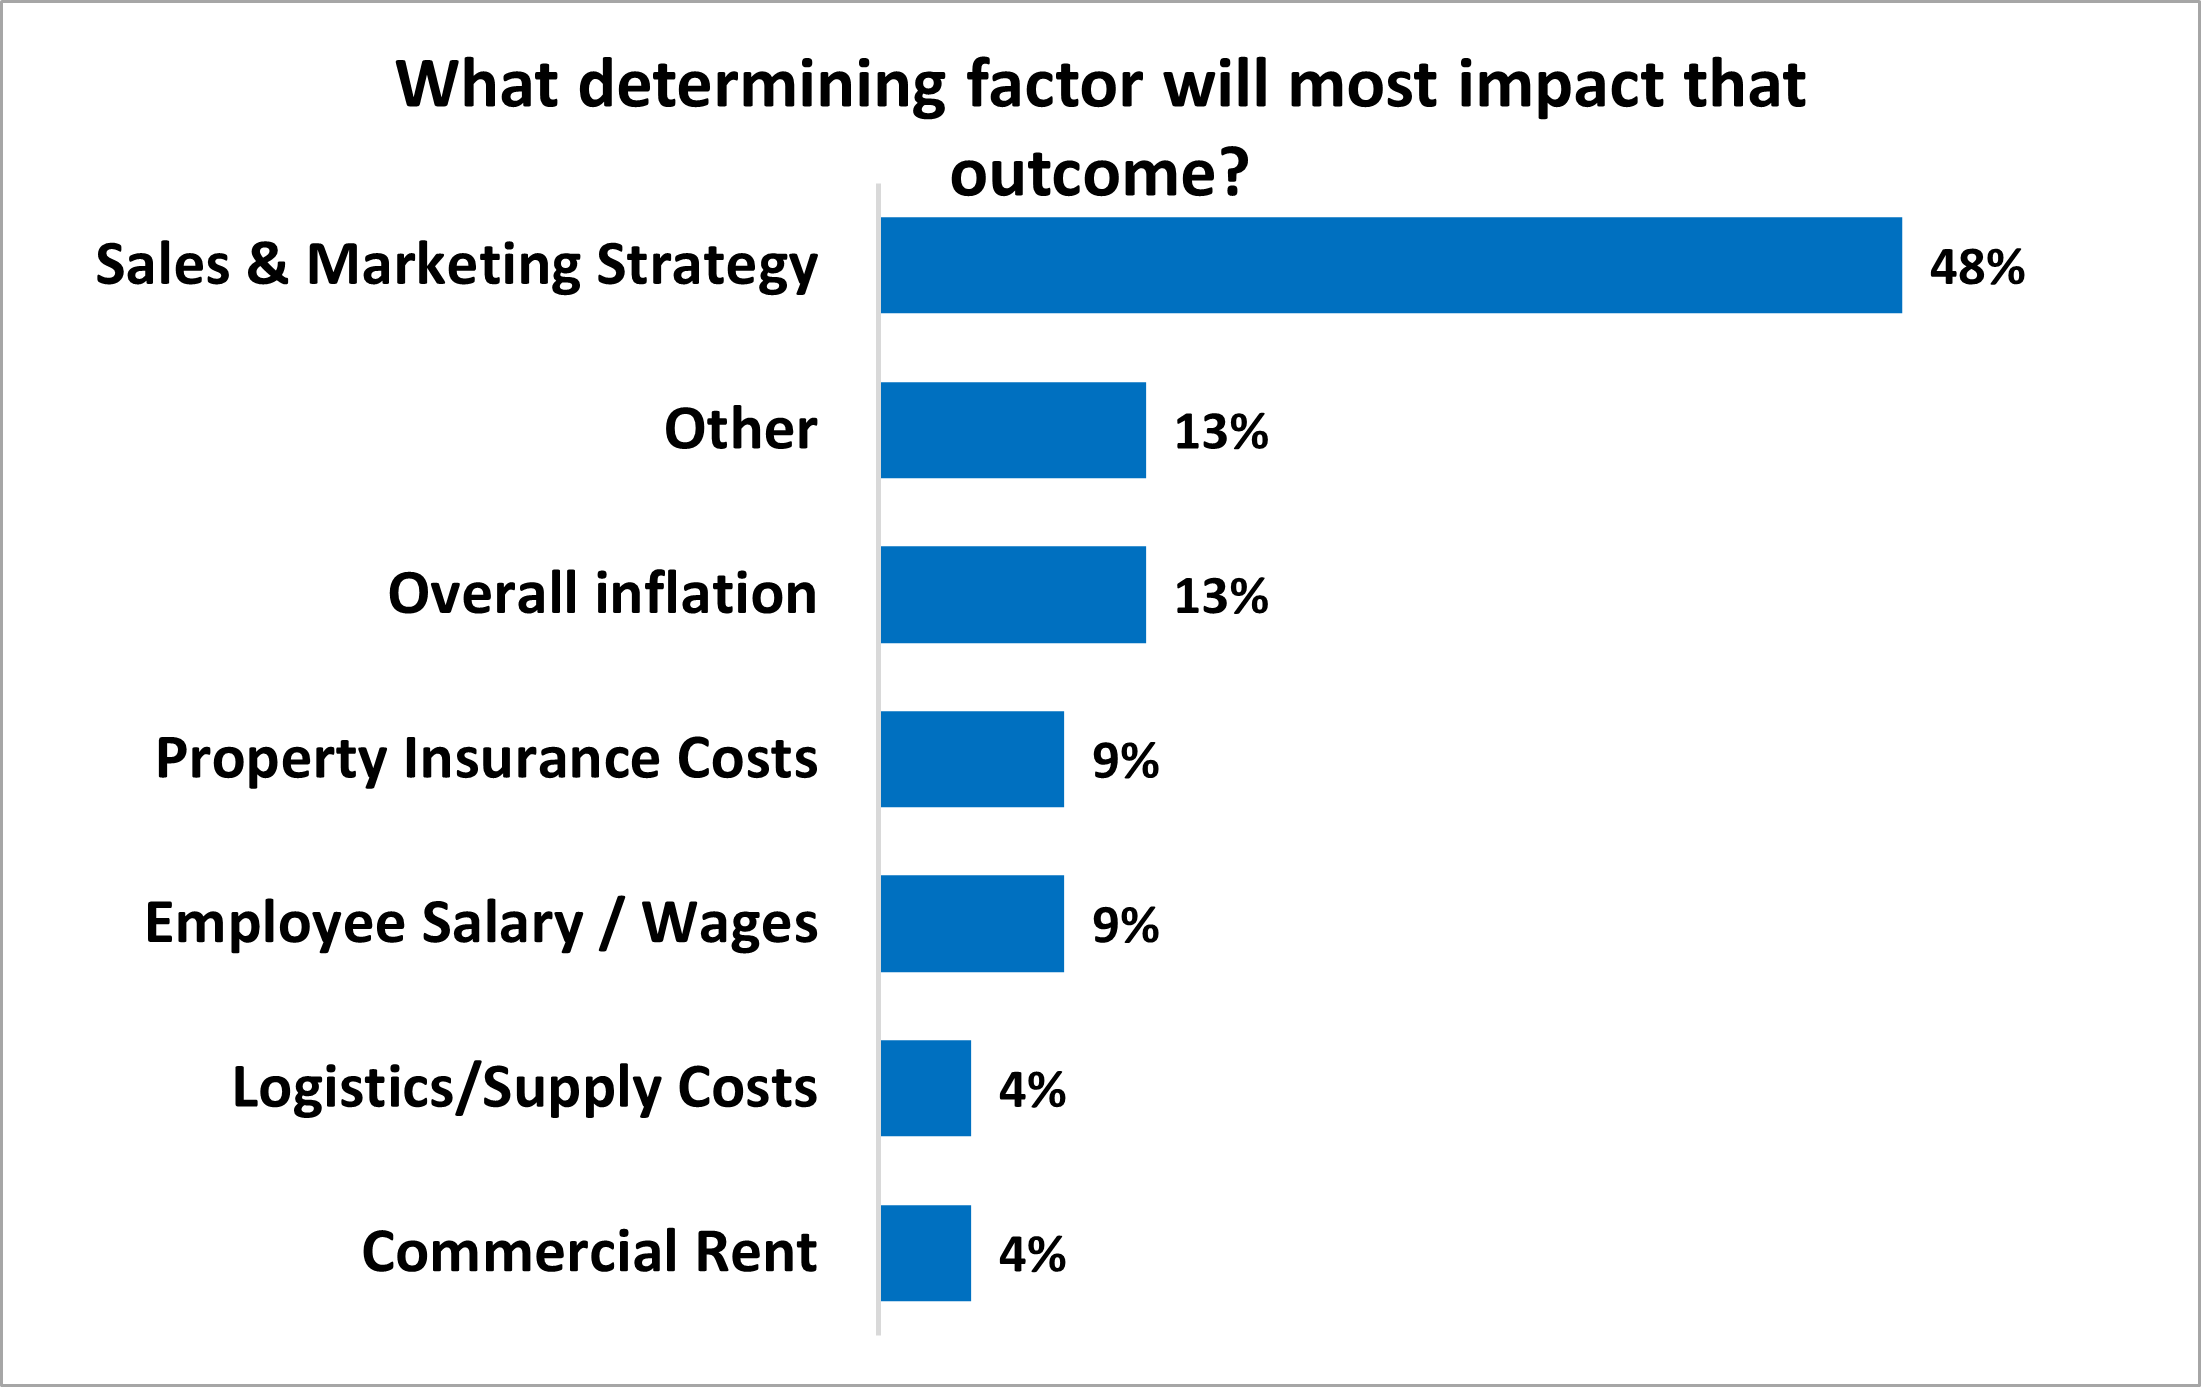 What determining factor will most impact that outcome? Sales & Marketing Strategy, 48%. Other, 13%. Overall inflation, 13%. Property Insurance Costs, 9%. Employee Salary/Wages, 9%. Logistics/Supply Costs, 4%. Commercial Rent, 4%.